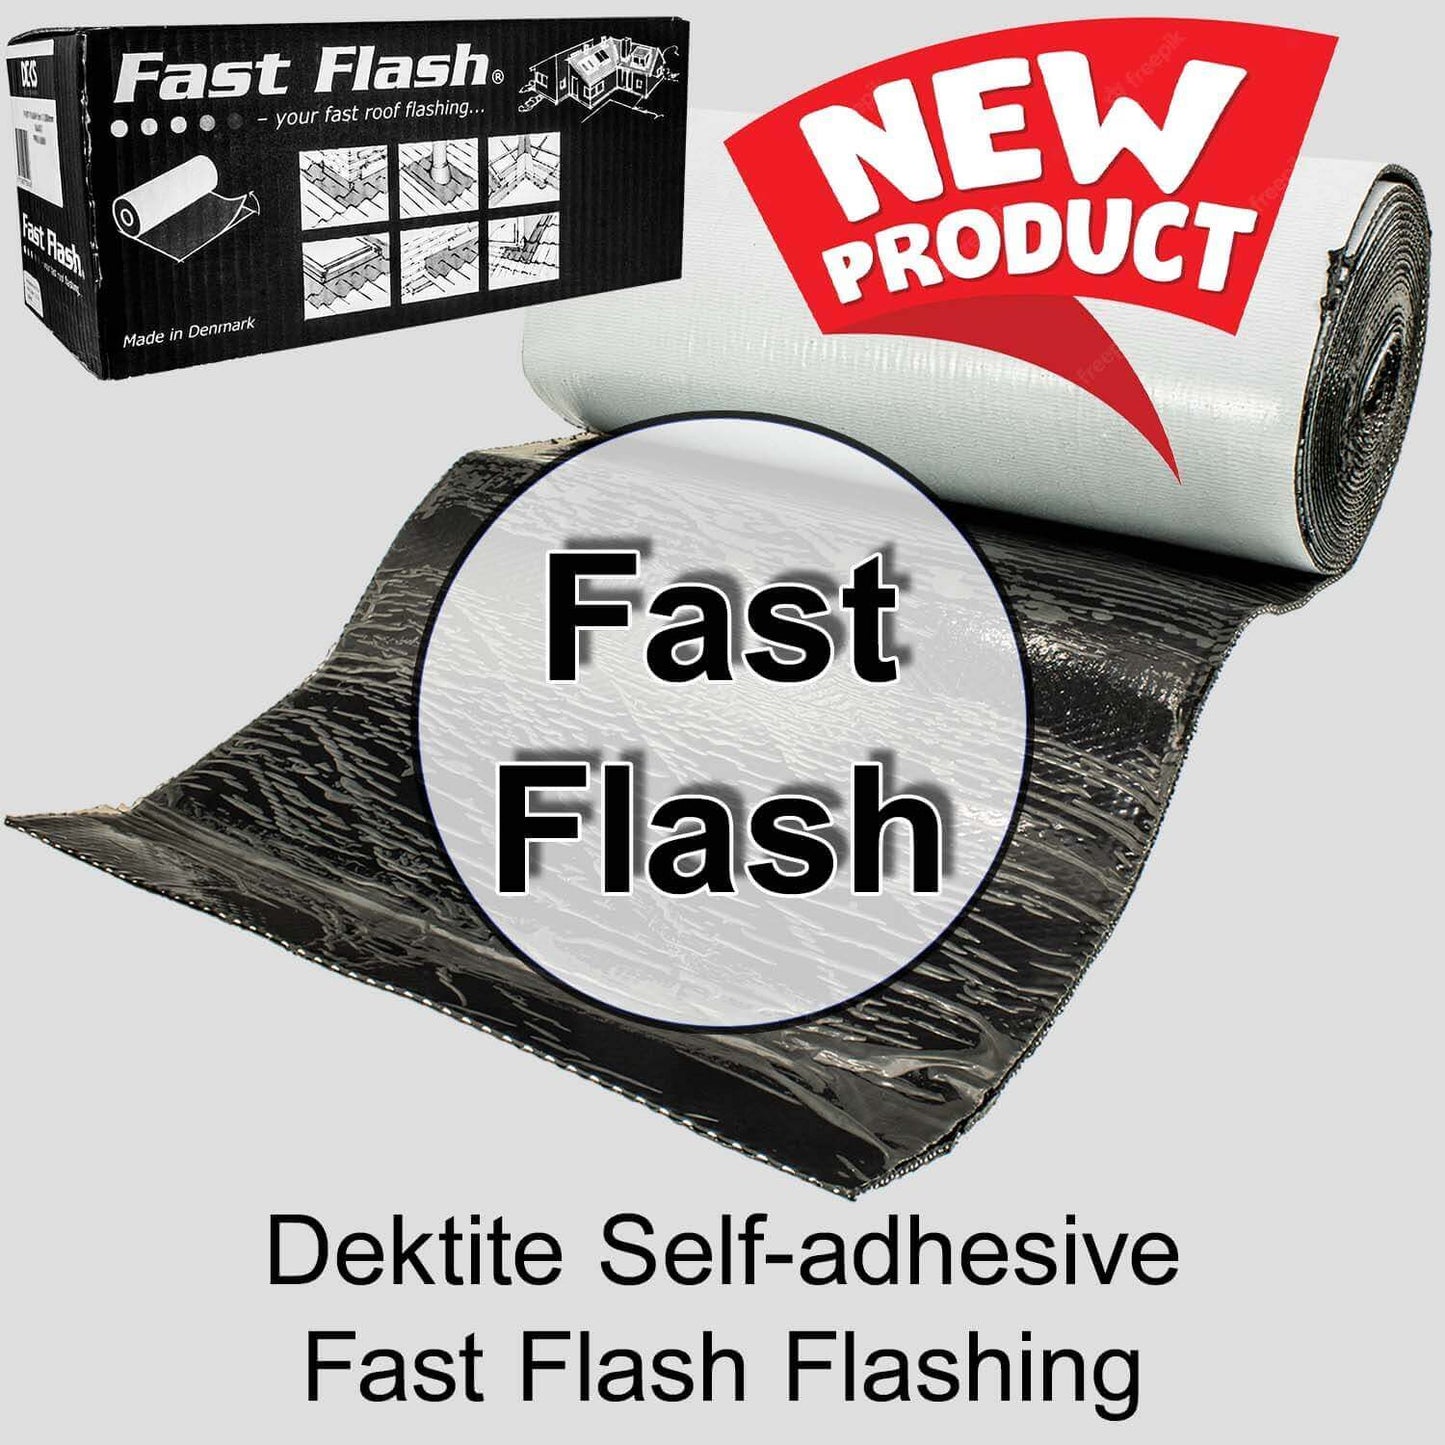 Dektite Self-adhesive Fast Flash Flashing For Most Roofing Materials - 11" x 16 Feet Polymer Roll And 22" x 16 Feet Polymer Roll